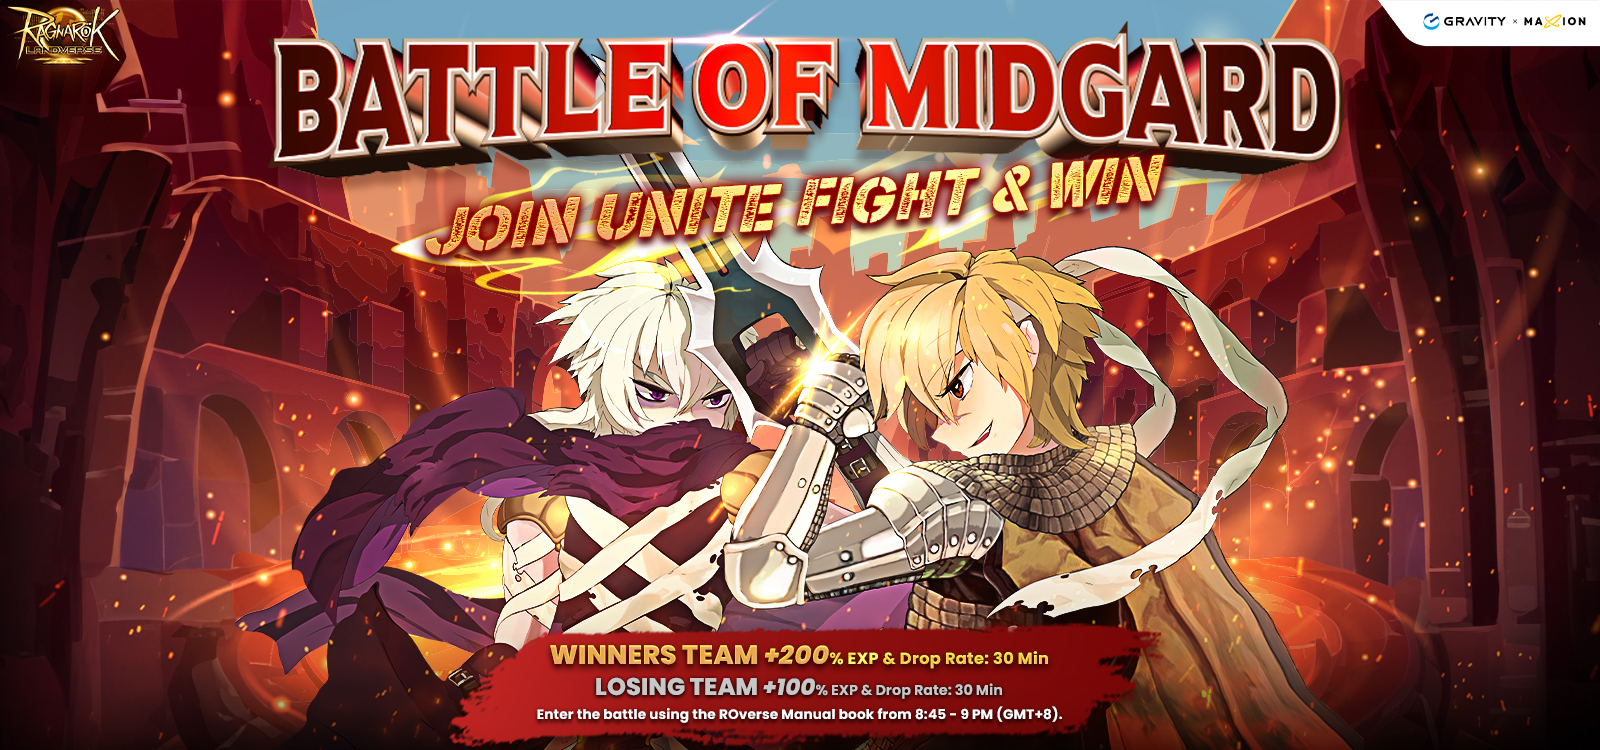 Battle of Midgard: Unite, Fight, and Reap the Rewards!